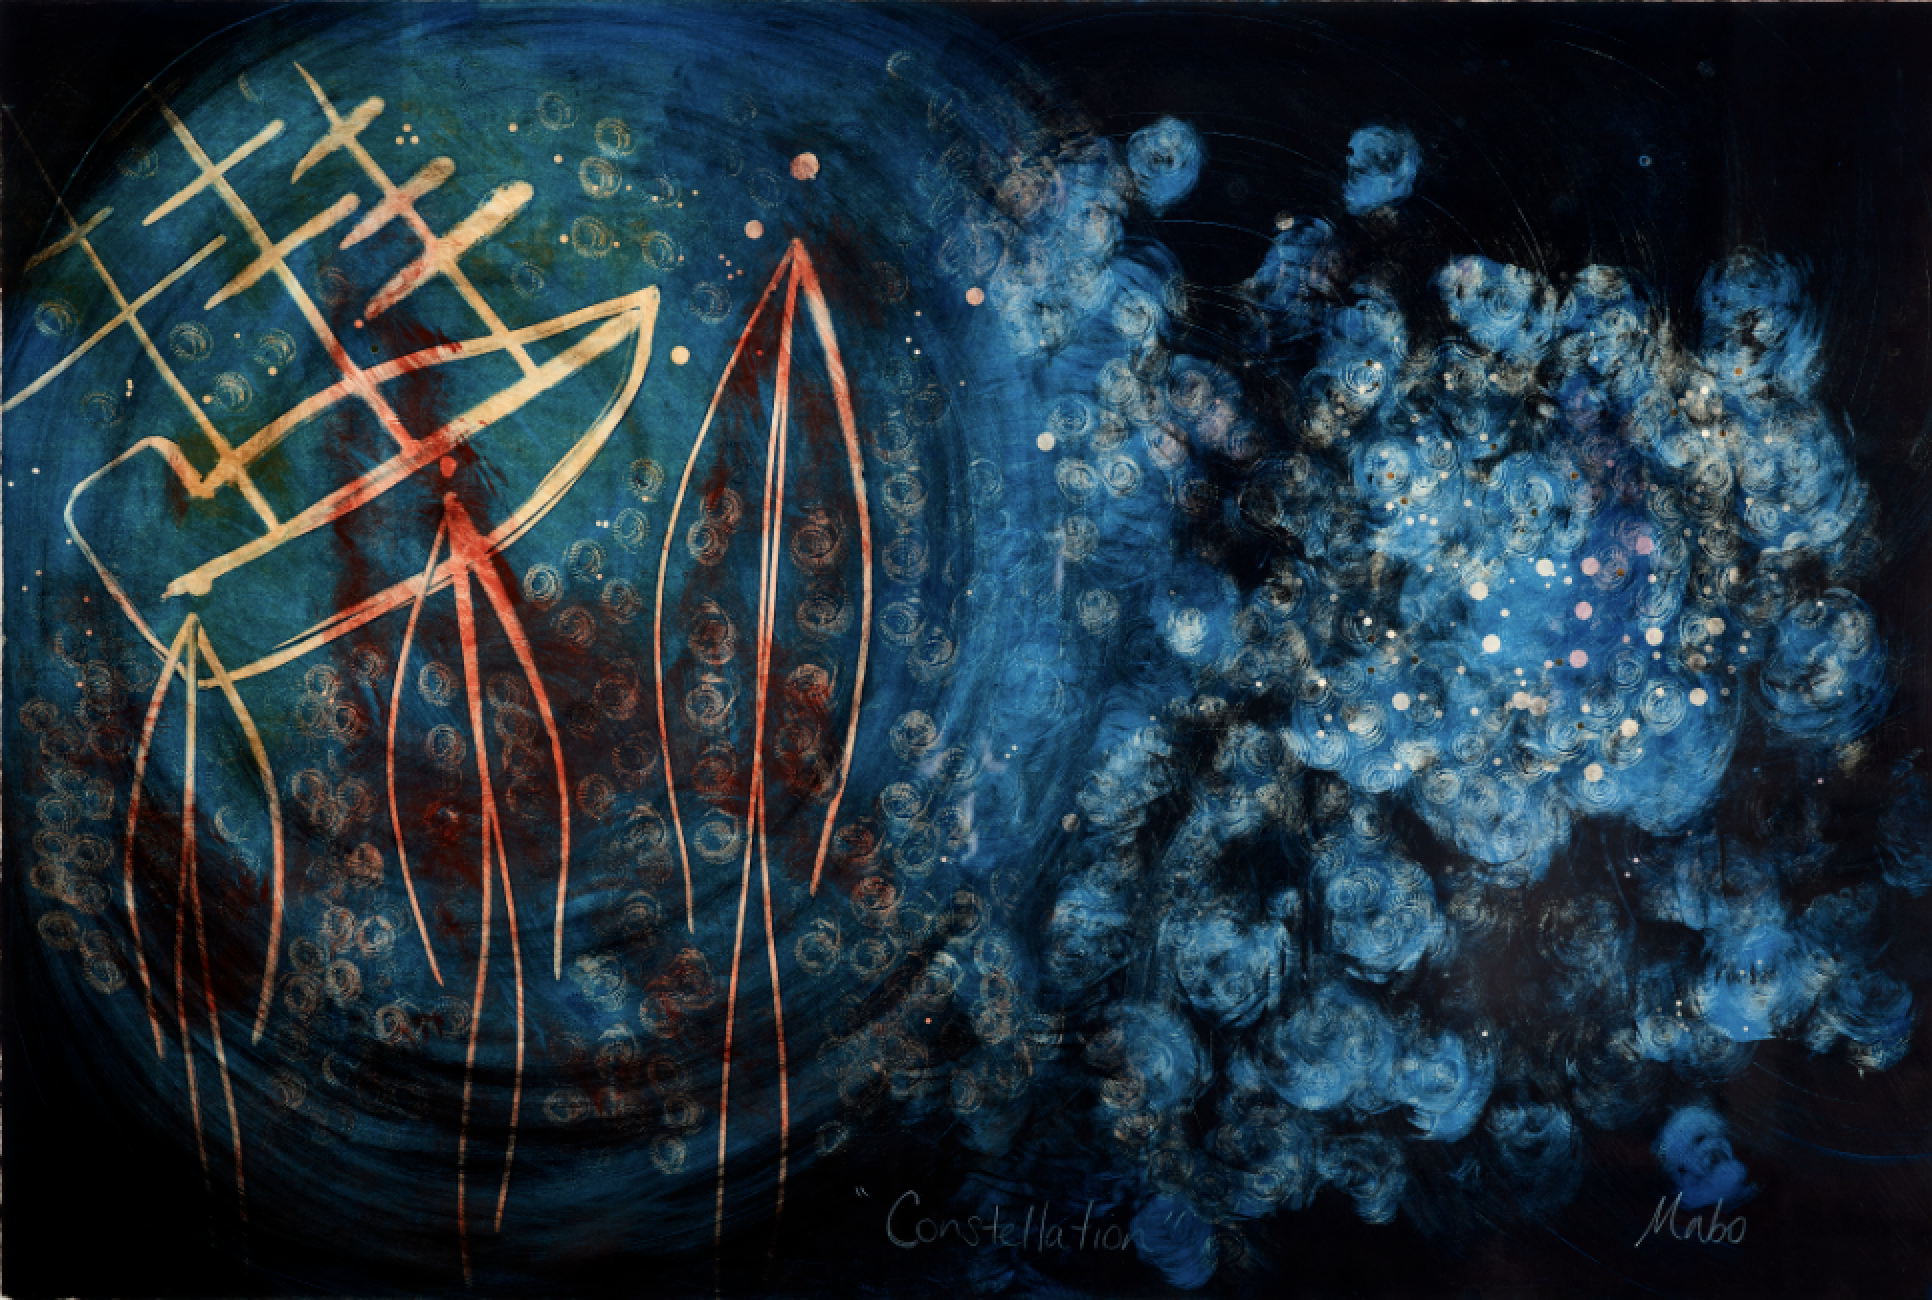 Constellation by Gail Mabo. Copyright Gail Mabo/Copyright Agency, 2021